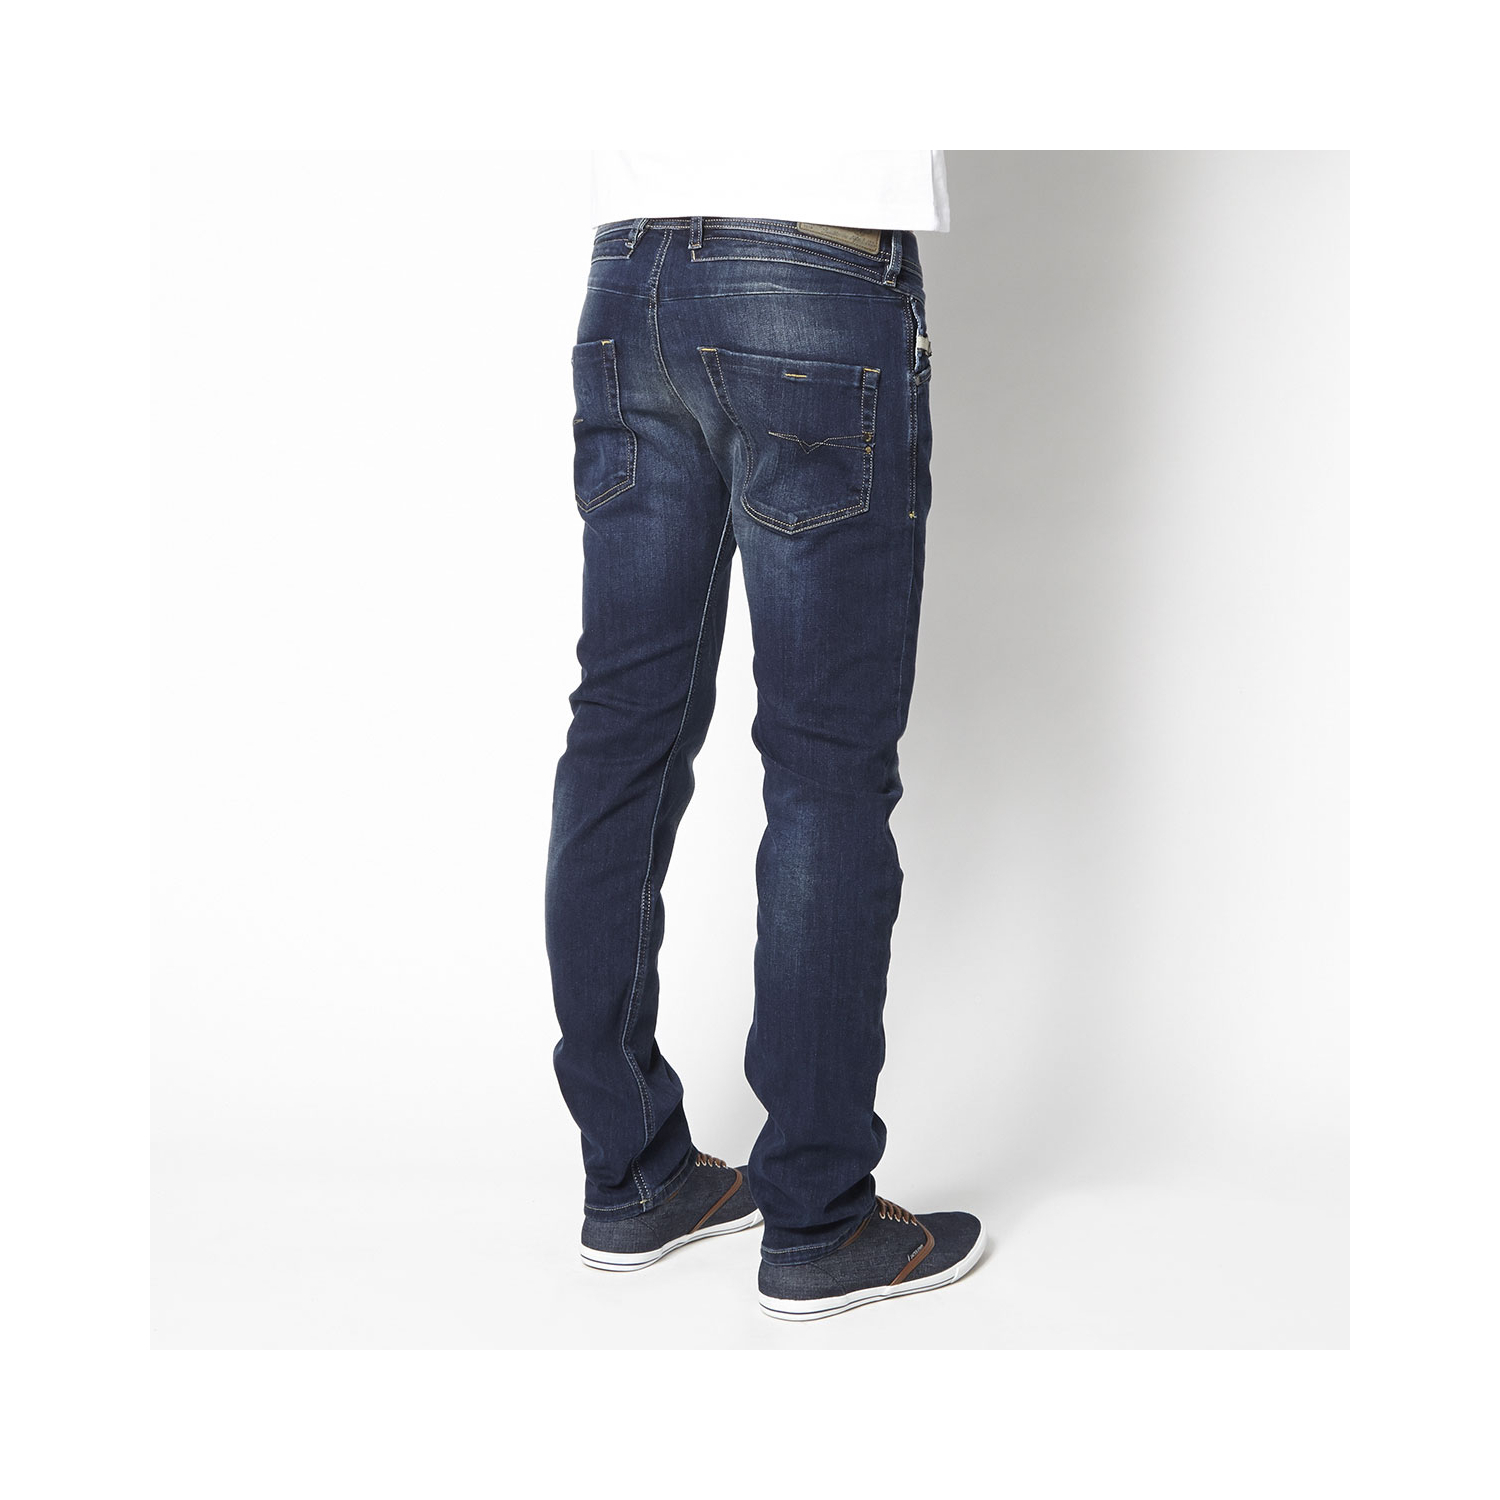 Slim Belther Jeans Navy